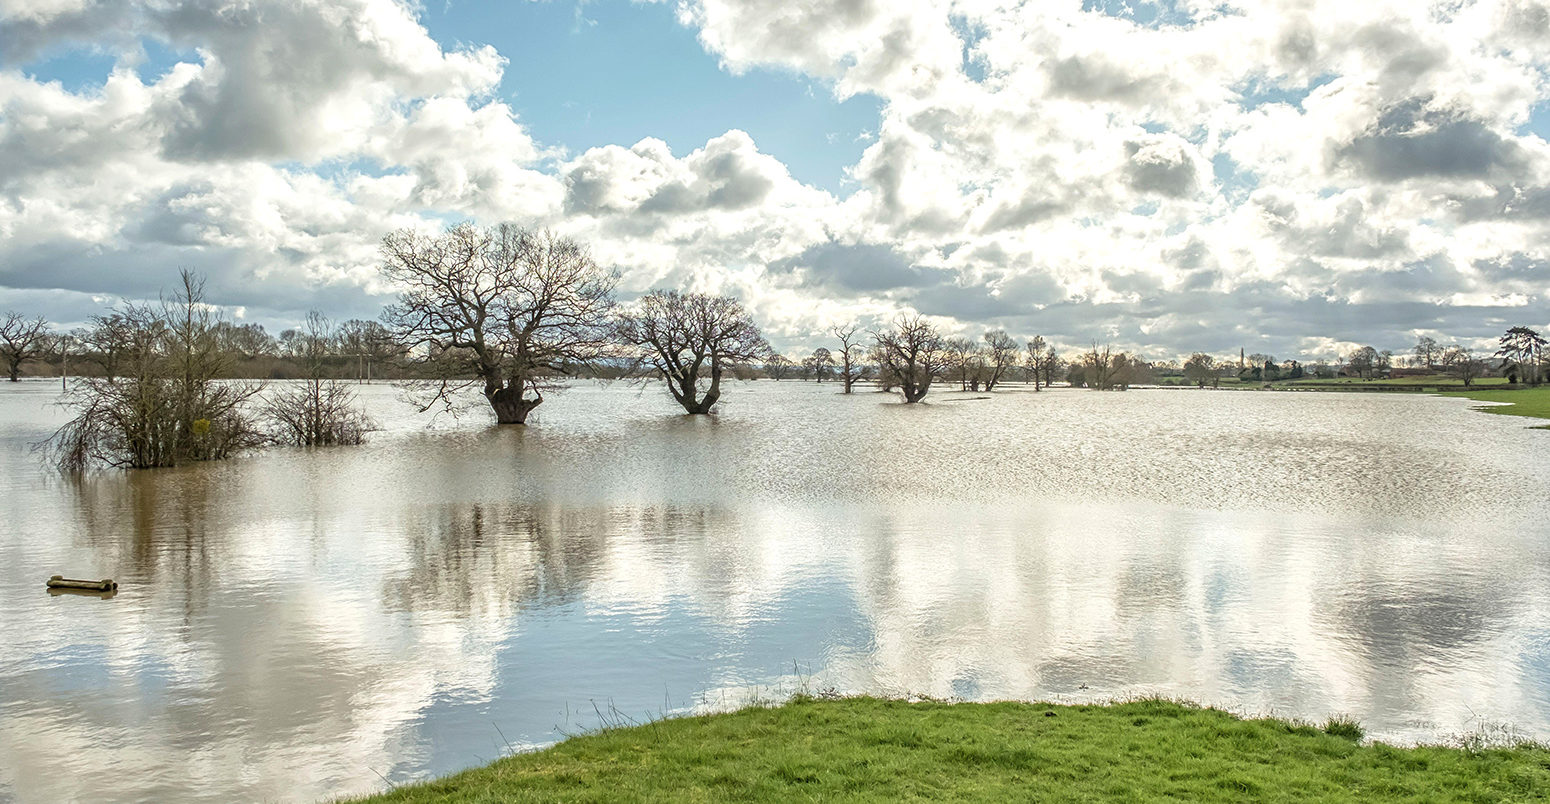 Flooded fields in Worcestershire, UK, on 27 February 2020. Credit: Shaun Davey / Alamy Stock Photo. 2B1Y2HB